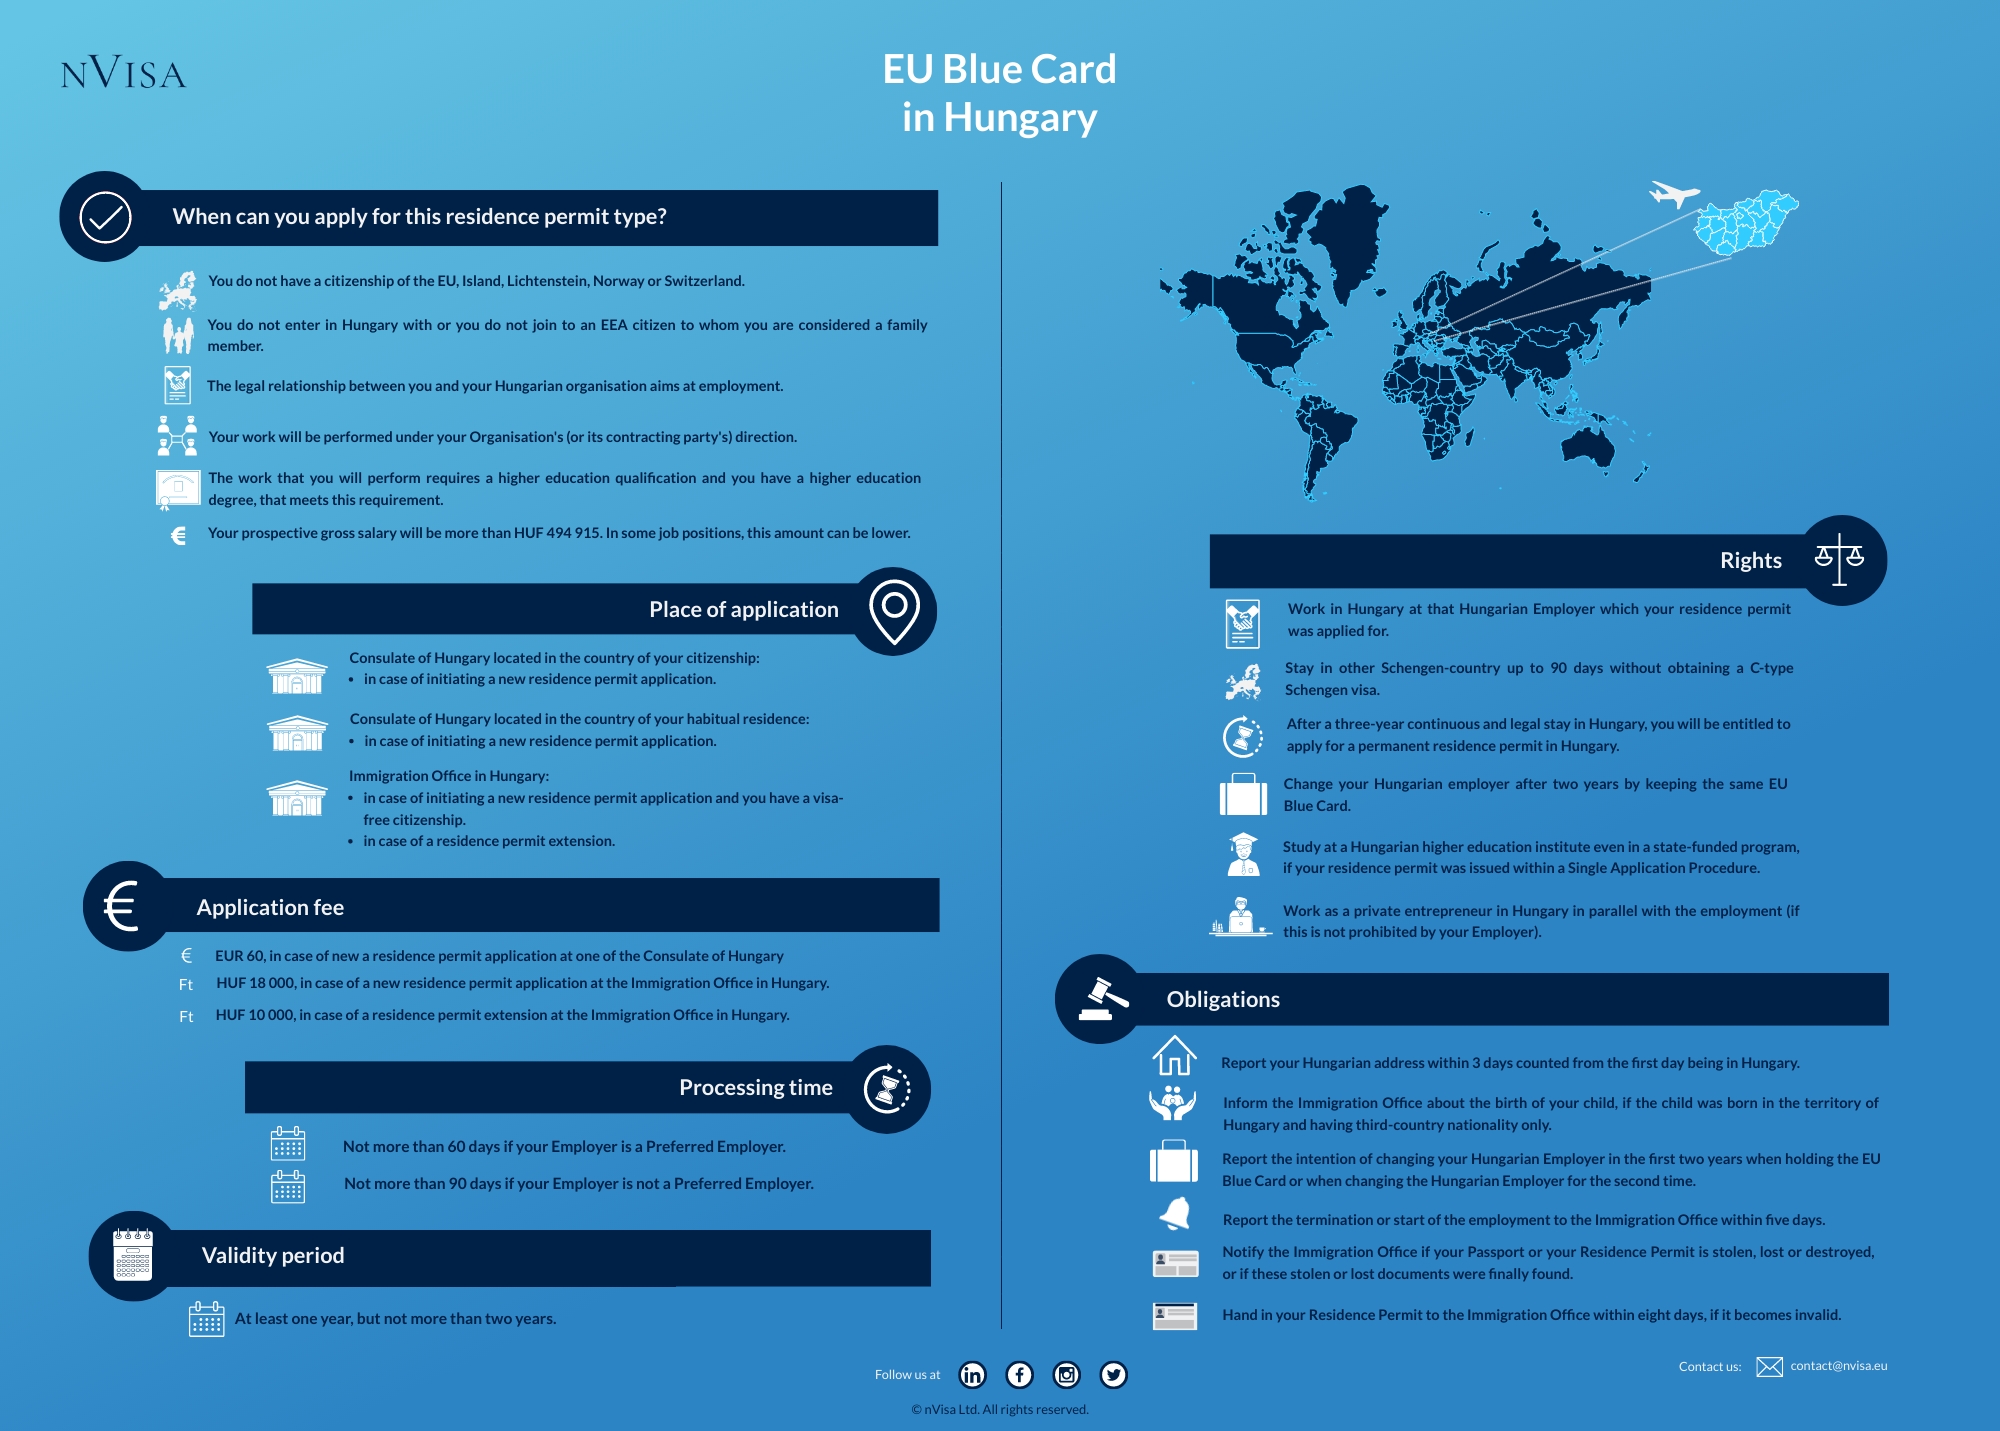 Infographic about immigration requirements and the details of obtaining an EU Blue Card in Hungary.